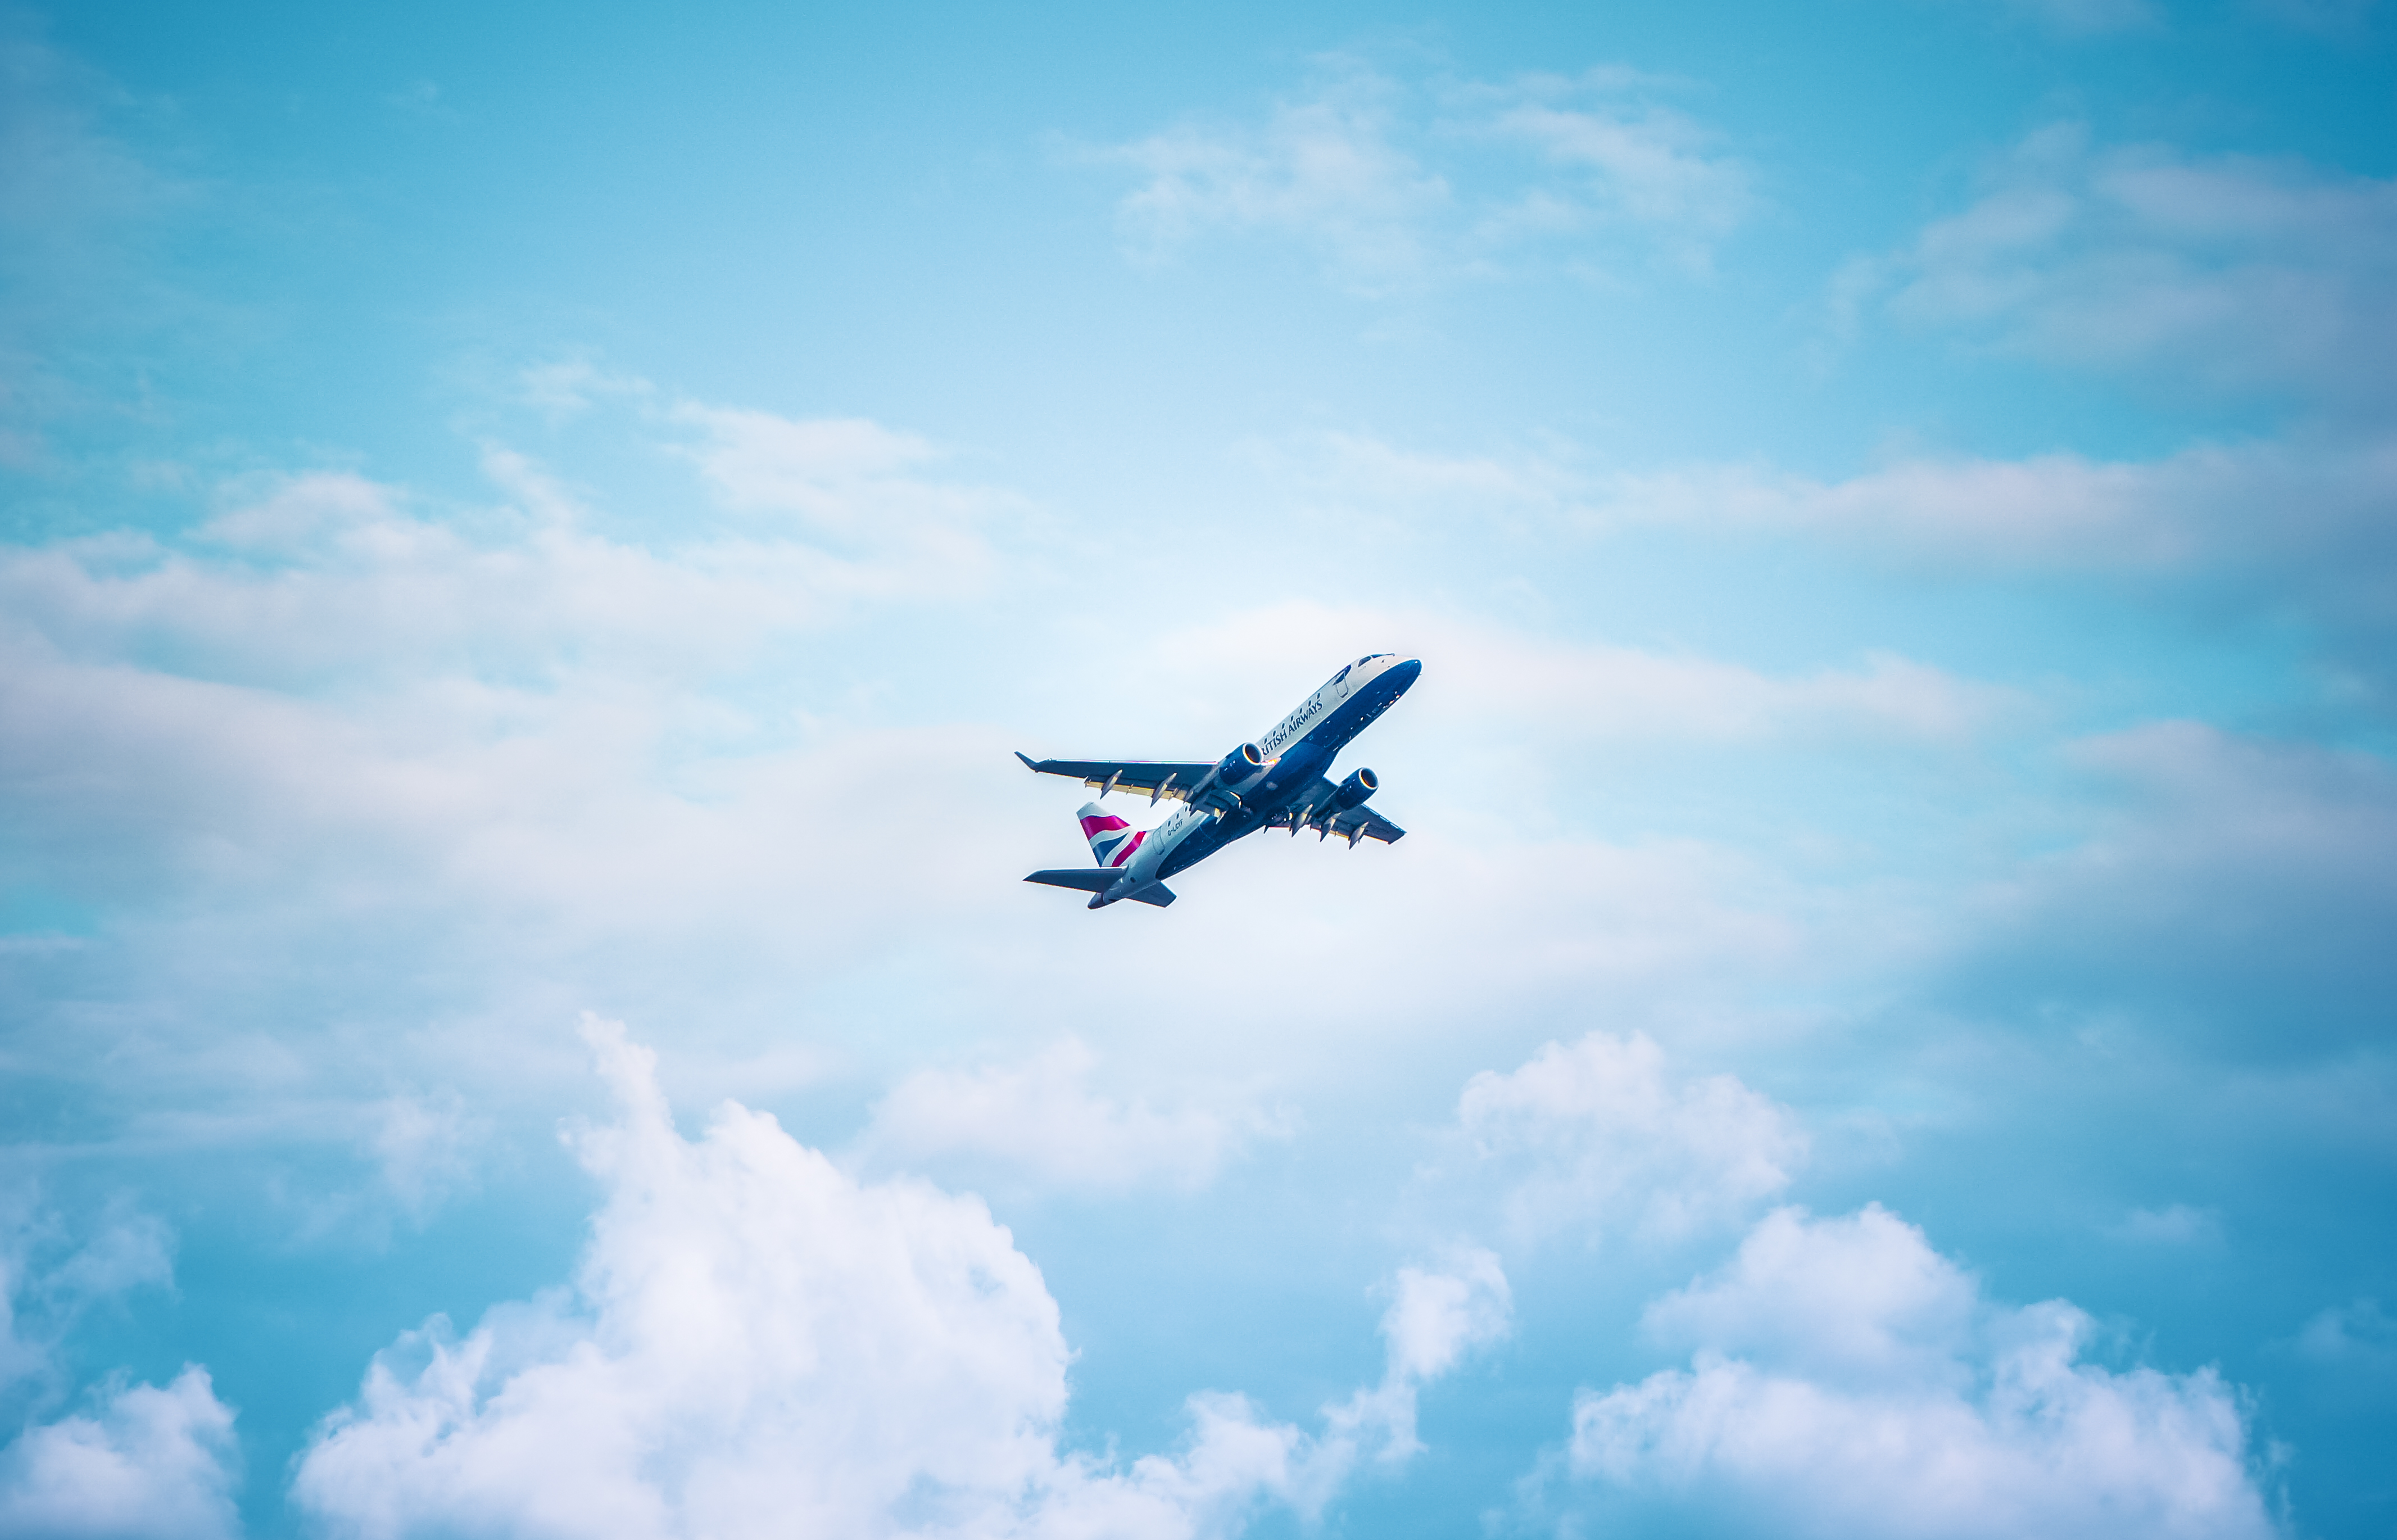 Aircraft Mobile Phone Wallpaper On Cloud Images Free Download on Lovepik |  400640342